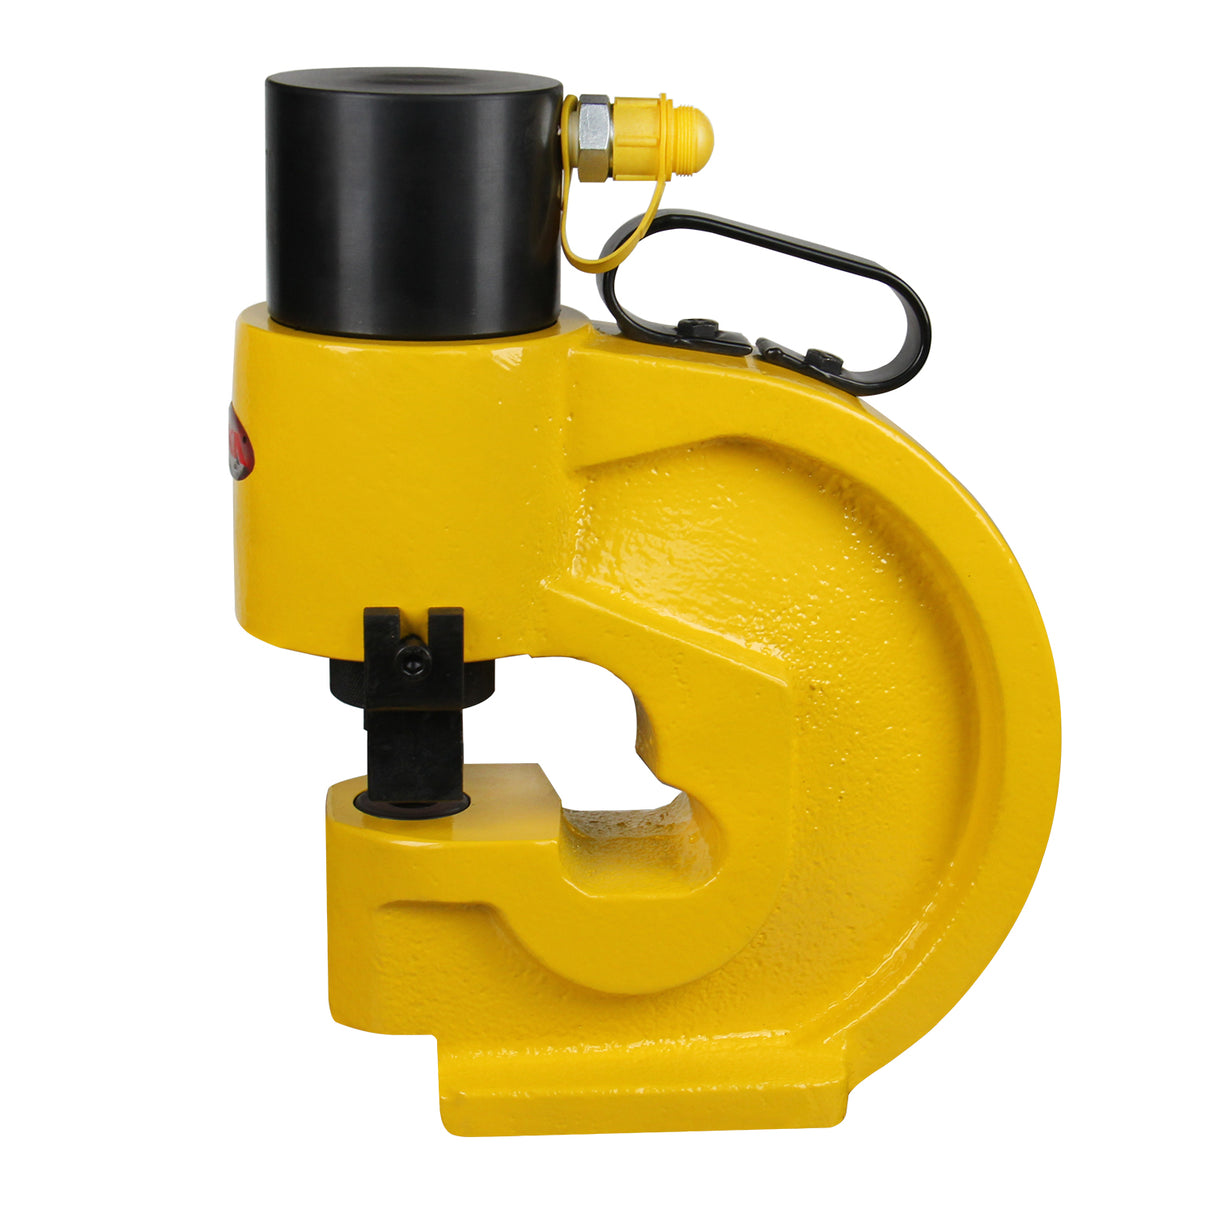 Kaka Industrial CH-70 Hydraulic Hole Puncher for 35T Hole Digger Force Puncher Smooth Hole Puncher for Iron Plate Copper Bar Aluminum Stainless Steel